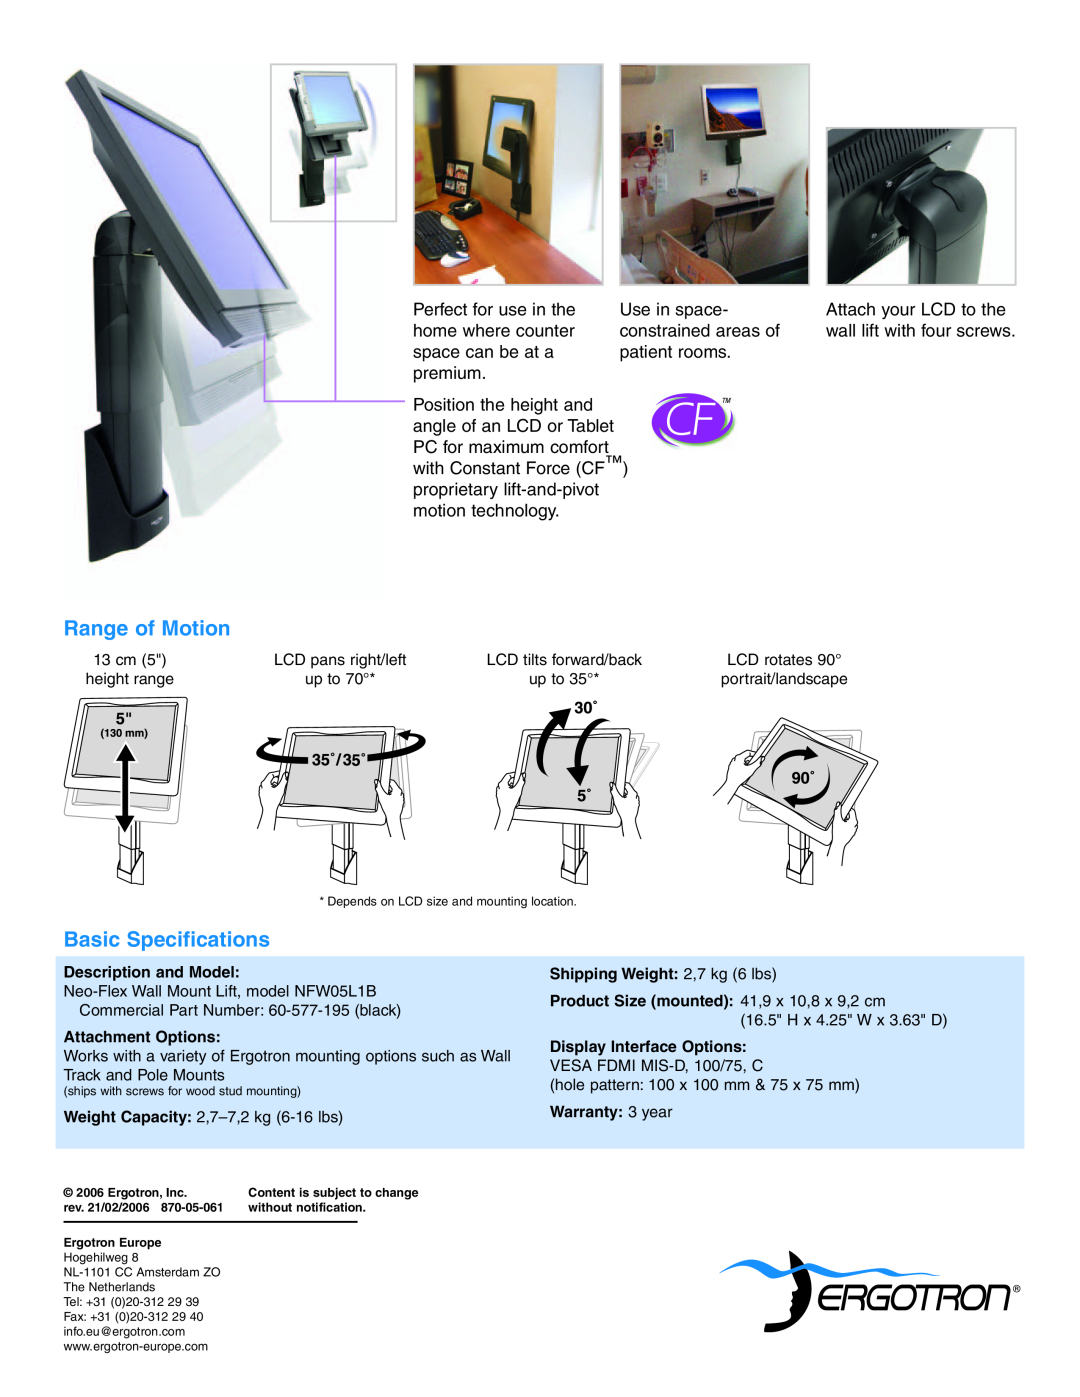 Ergotron Wall Mount Lift Range of Motion, Basic Specifications, Description and Model, Attachment Options, Warranty 3 year 